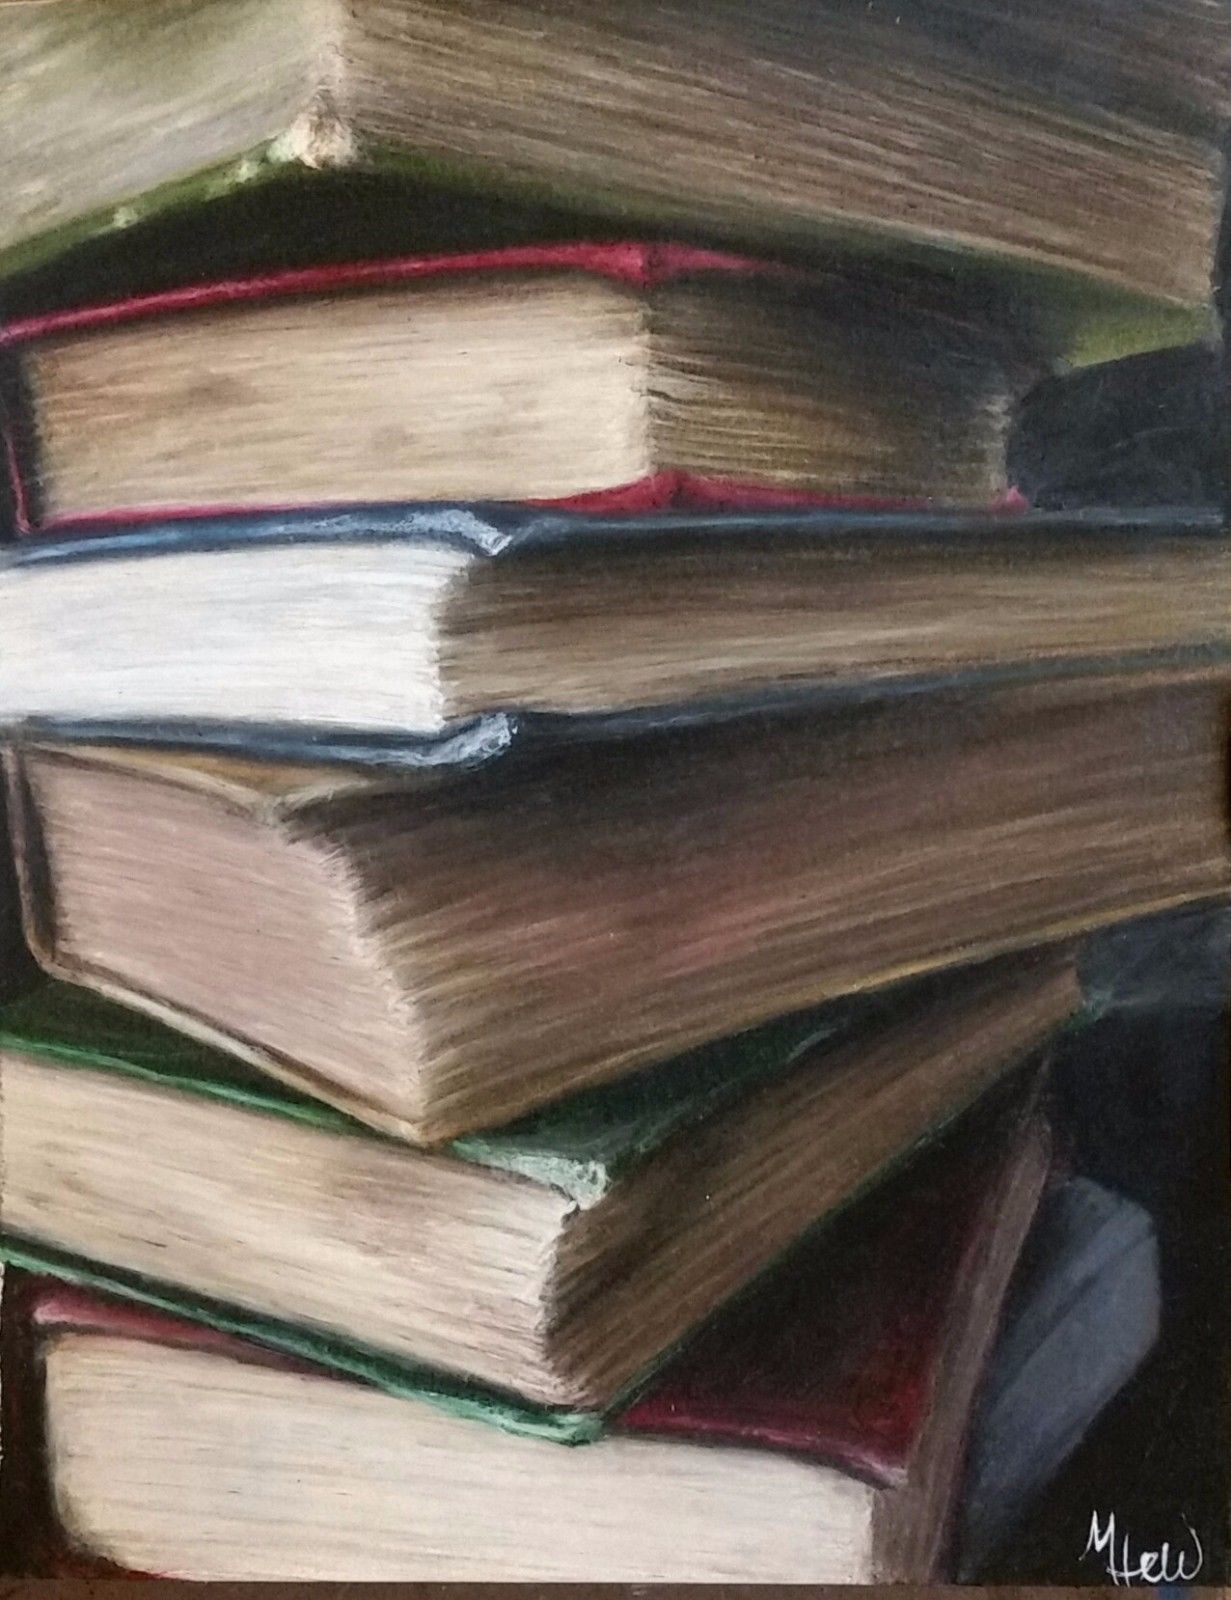 MHEW ORIGINAL Still Life Drawing Stack Of Books Colored Pencil 8x10 ...